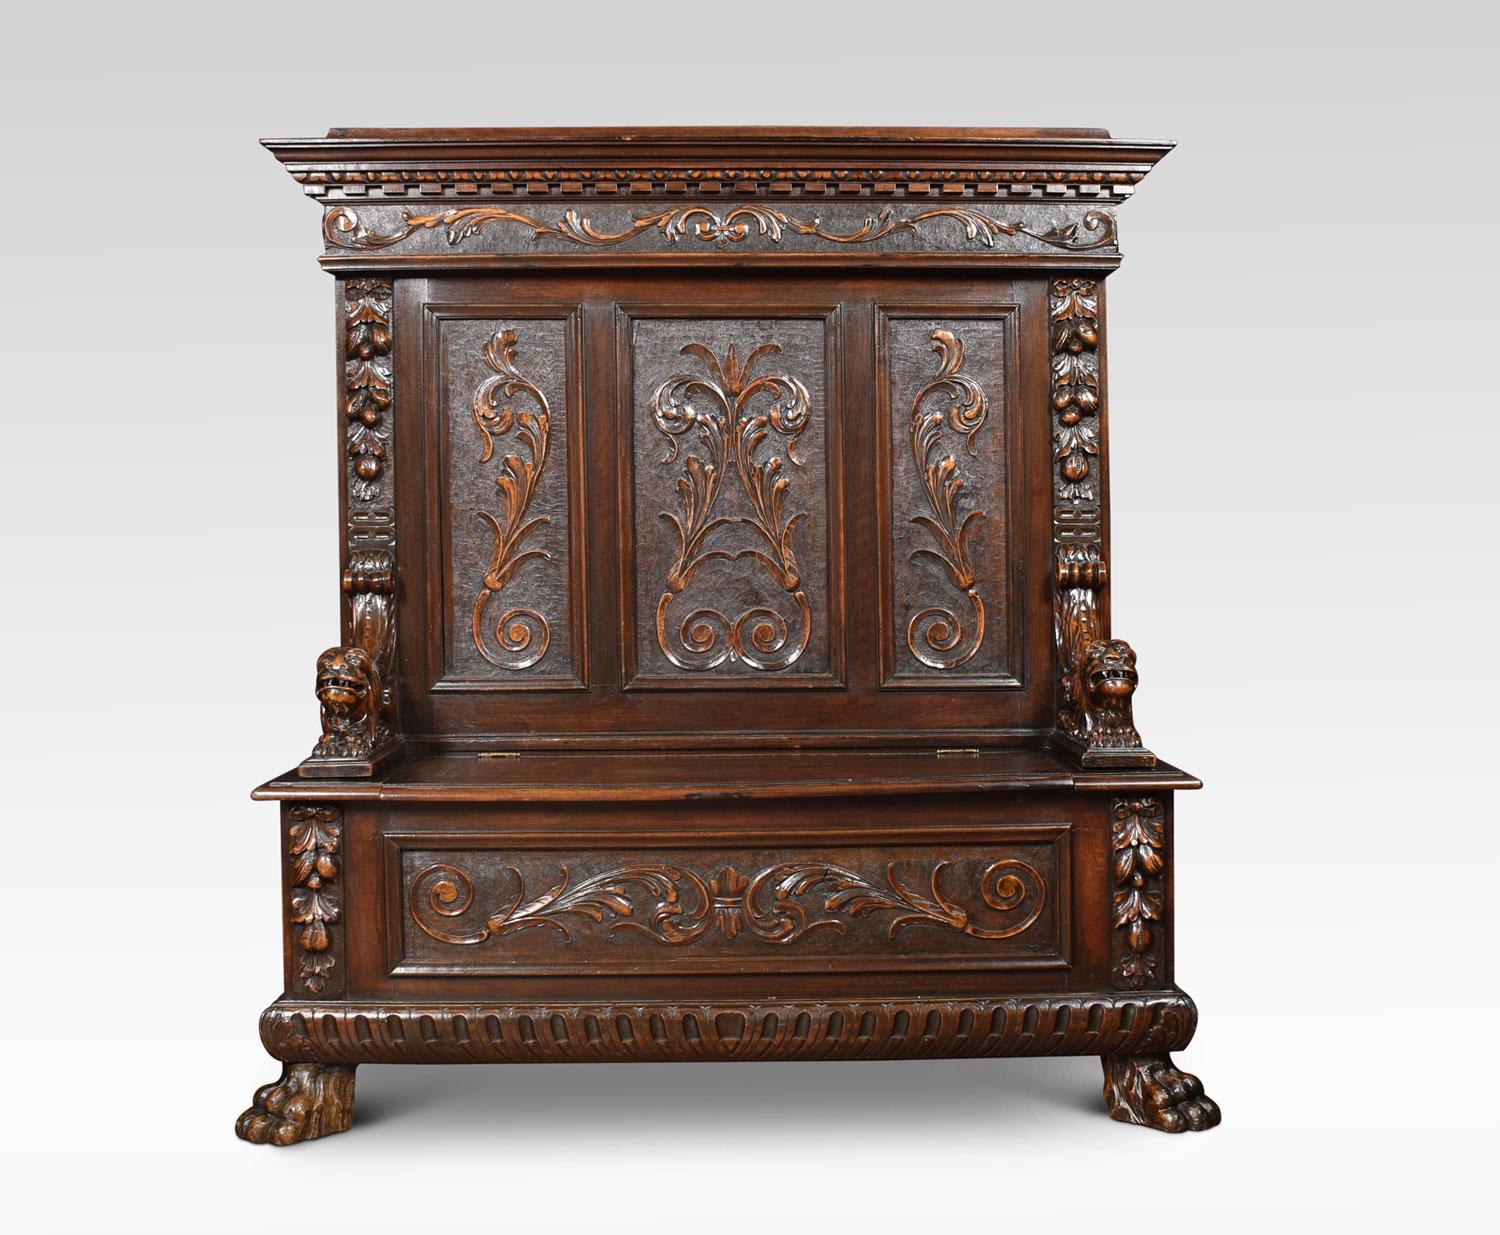 19th century walnut hall settle the three-panel back with a moulded dentil cornice and fruiting traceries. Above lion monopodia arms enclosing the box seat opening to reveal large storage area. All raised up on bold paw feet.
Dimensions:
Height 59